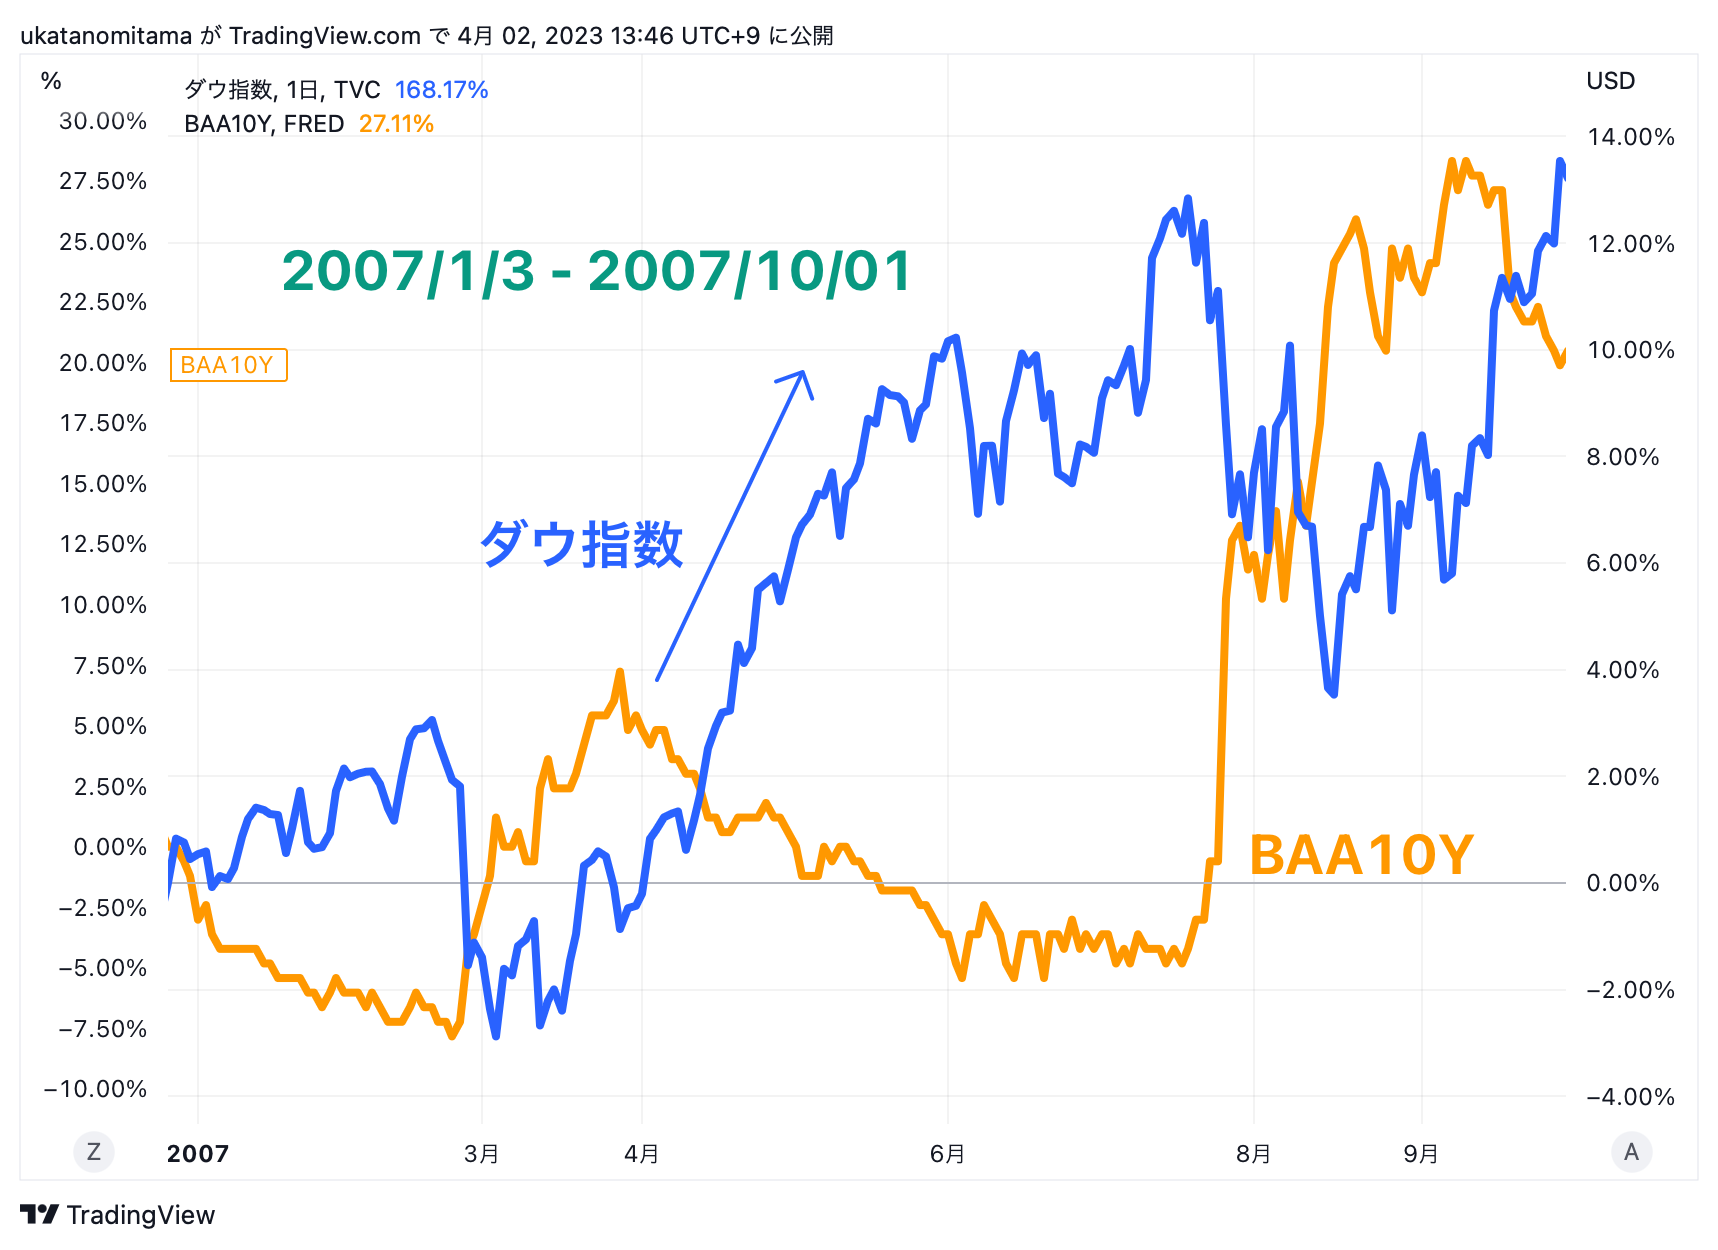 BAA10Y and Dow Jones Index before the bankruptcy of Lehman Brothers